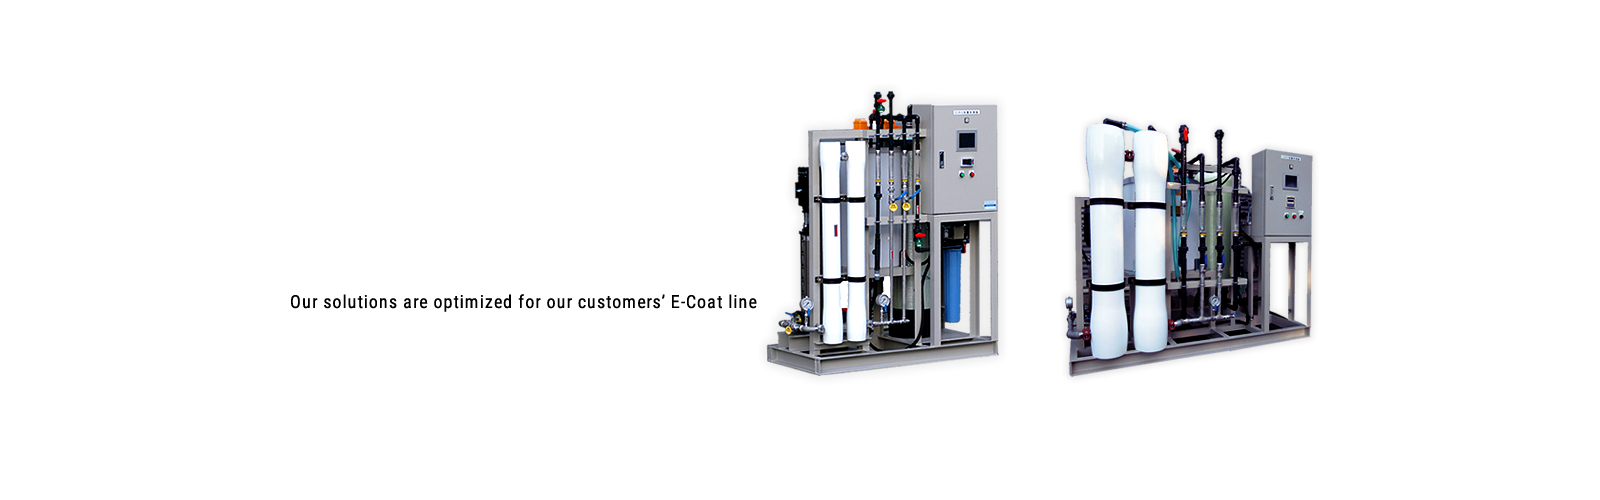 Customized solutions for each customers